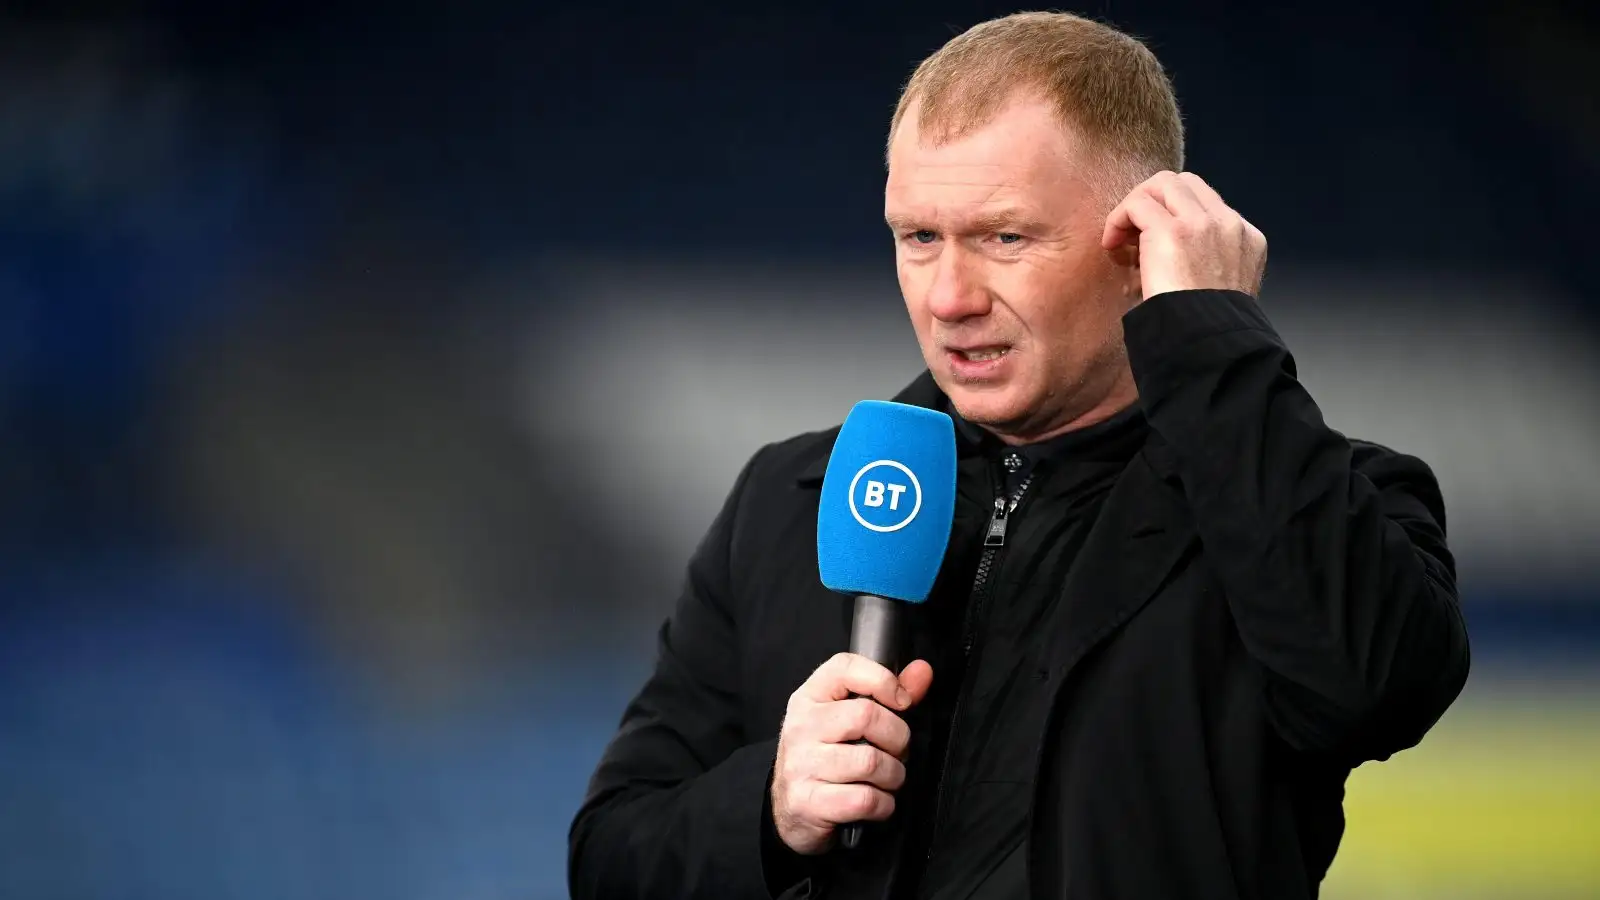 Scholes names forward Man Utd could sign and sets Ten Hag a target for the season